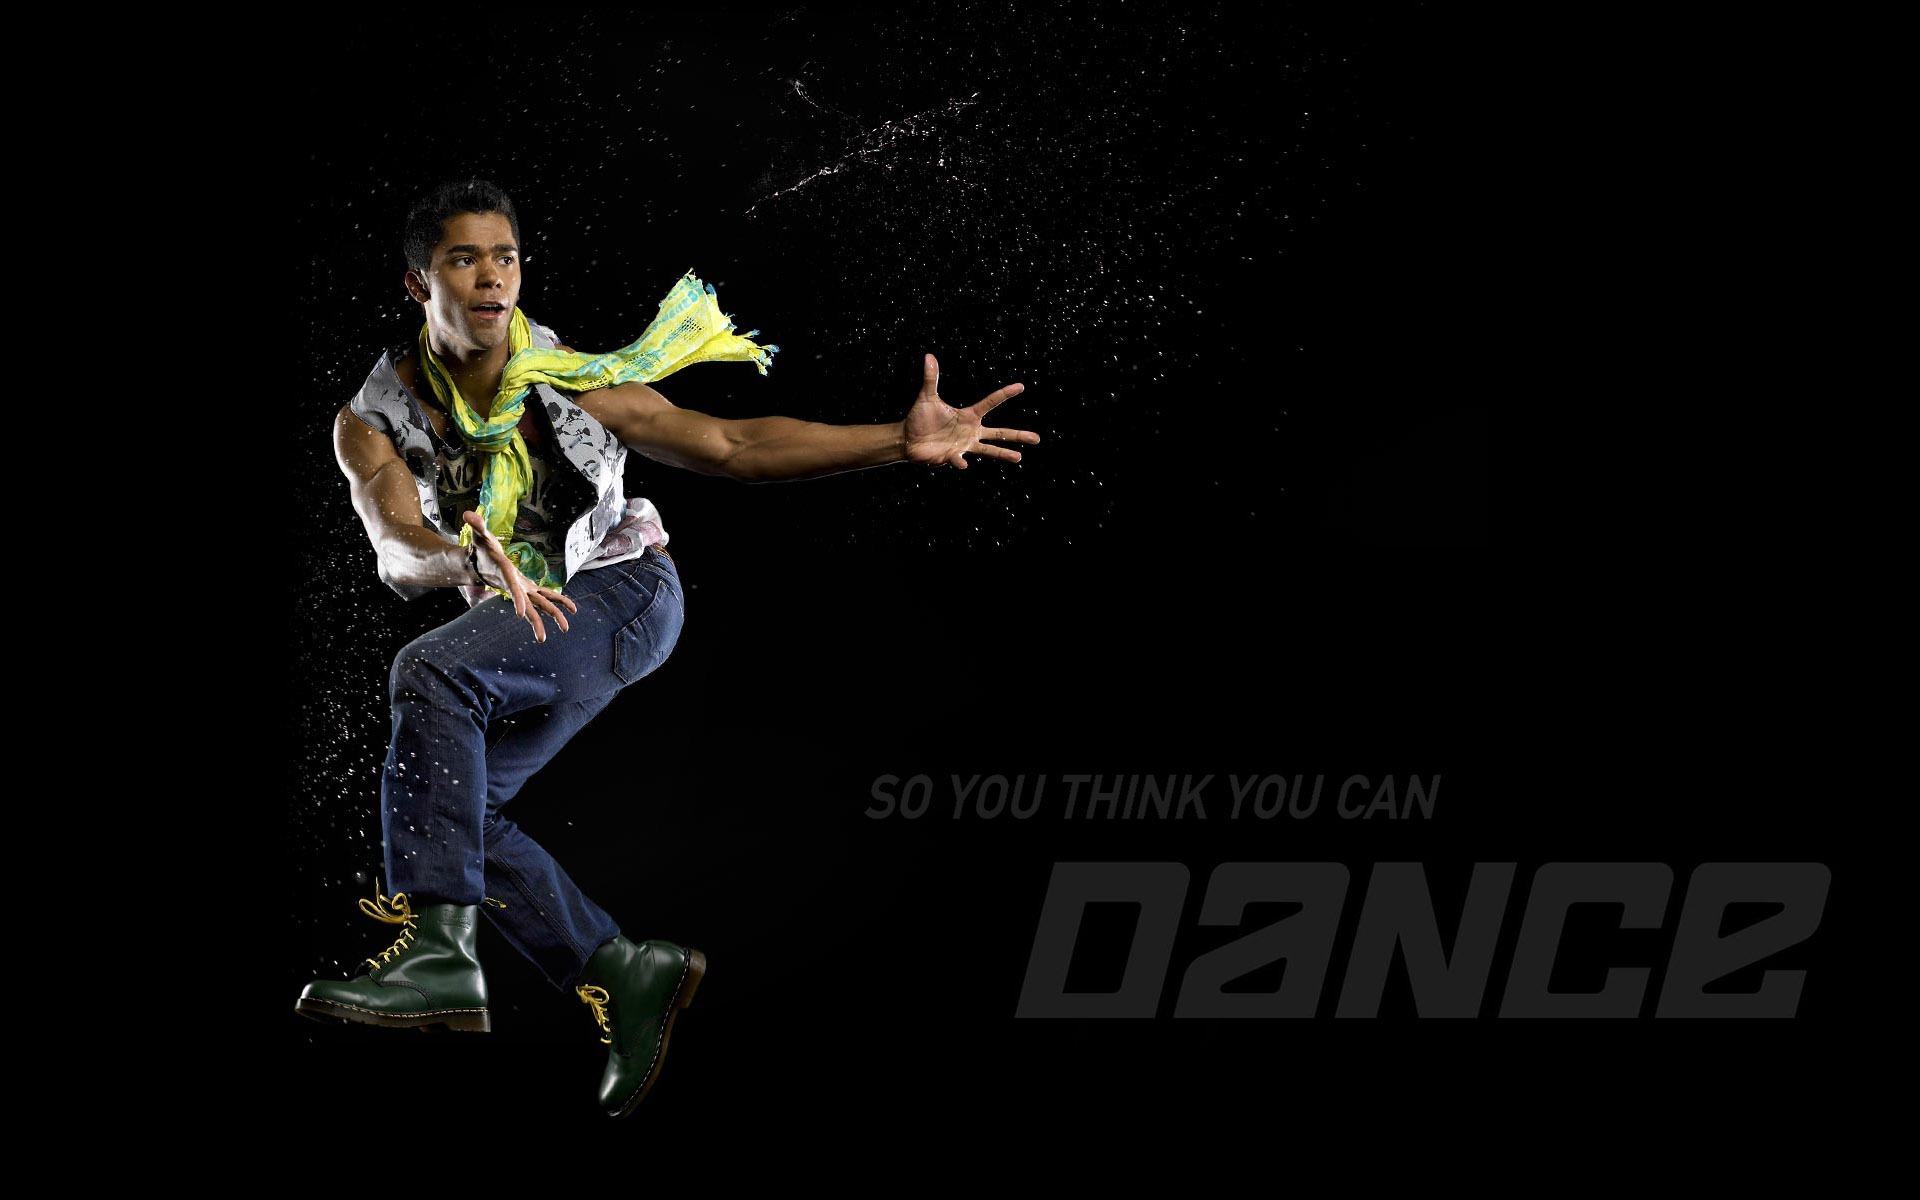 So You Think You Can Dance 舞林争霸 壁纸(一)2 - 1920x1200